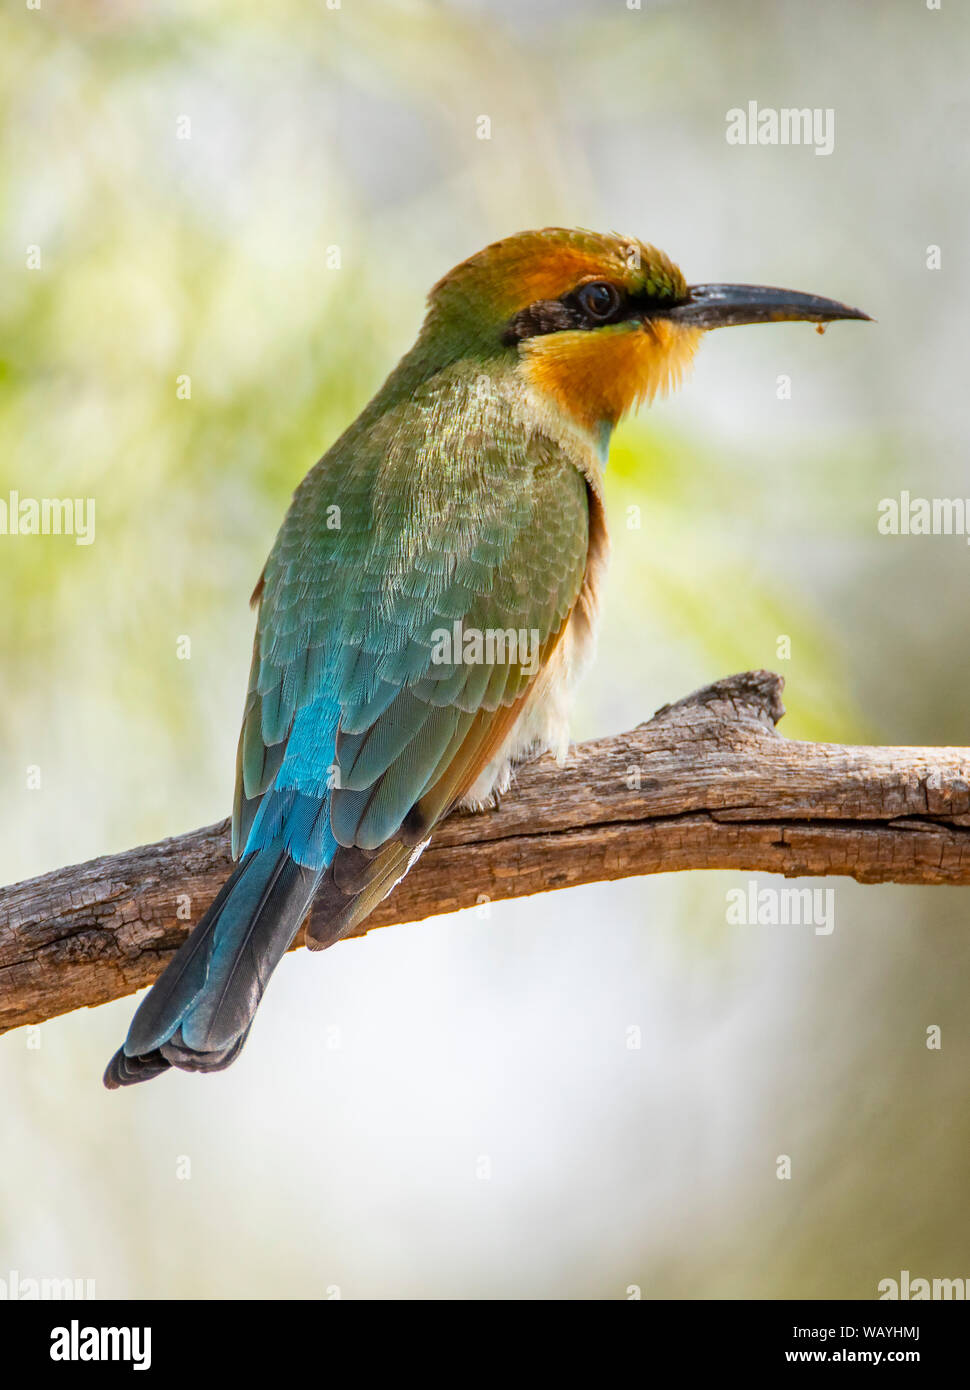 A Rainbow Bee Eater perched on a branch against a light bakground Stock Photo